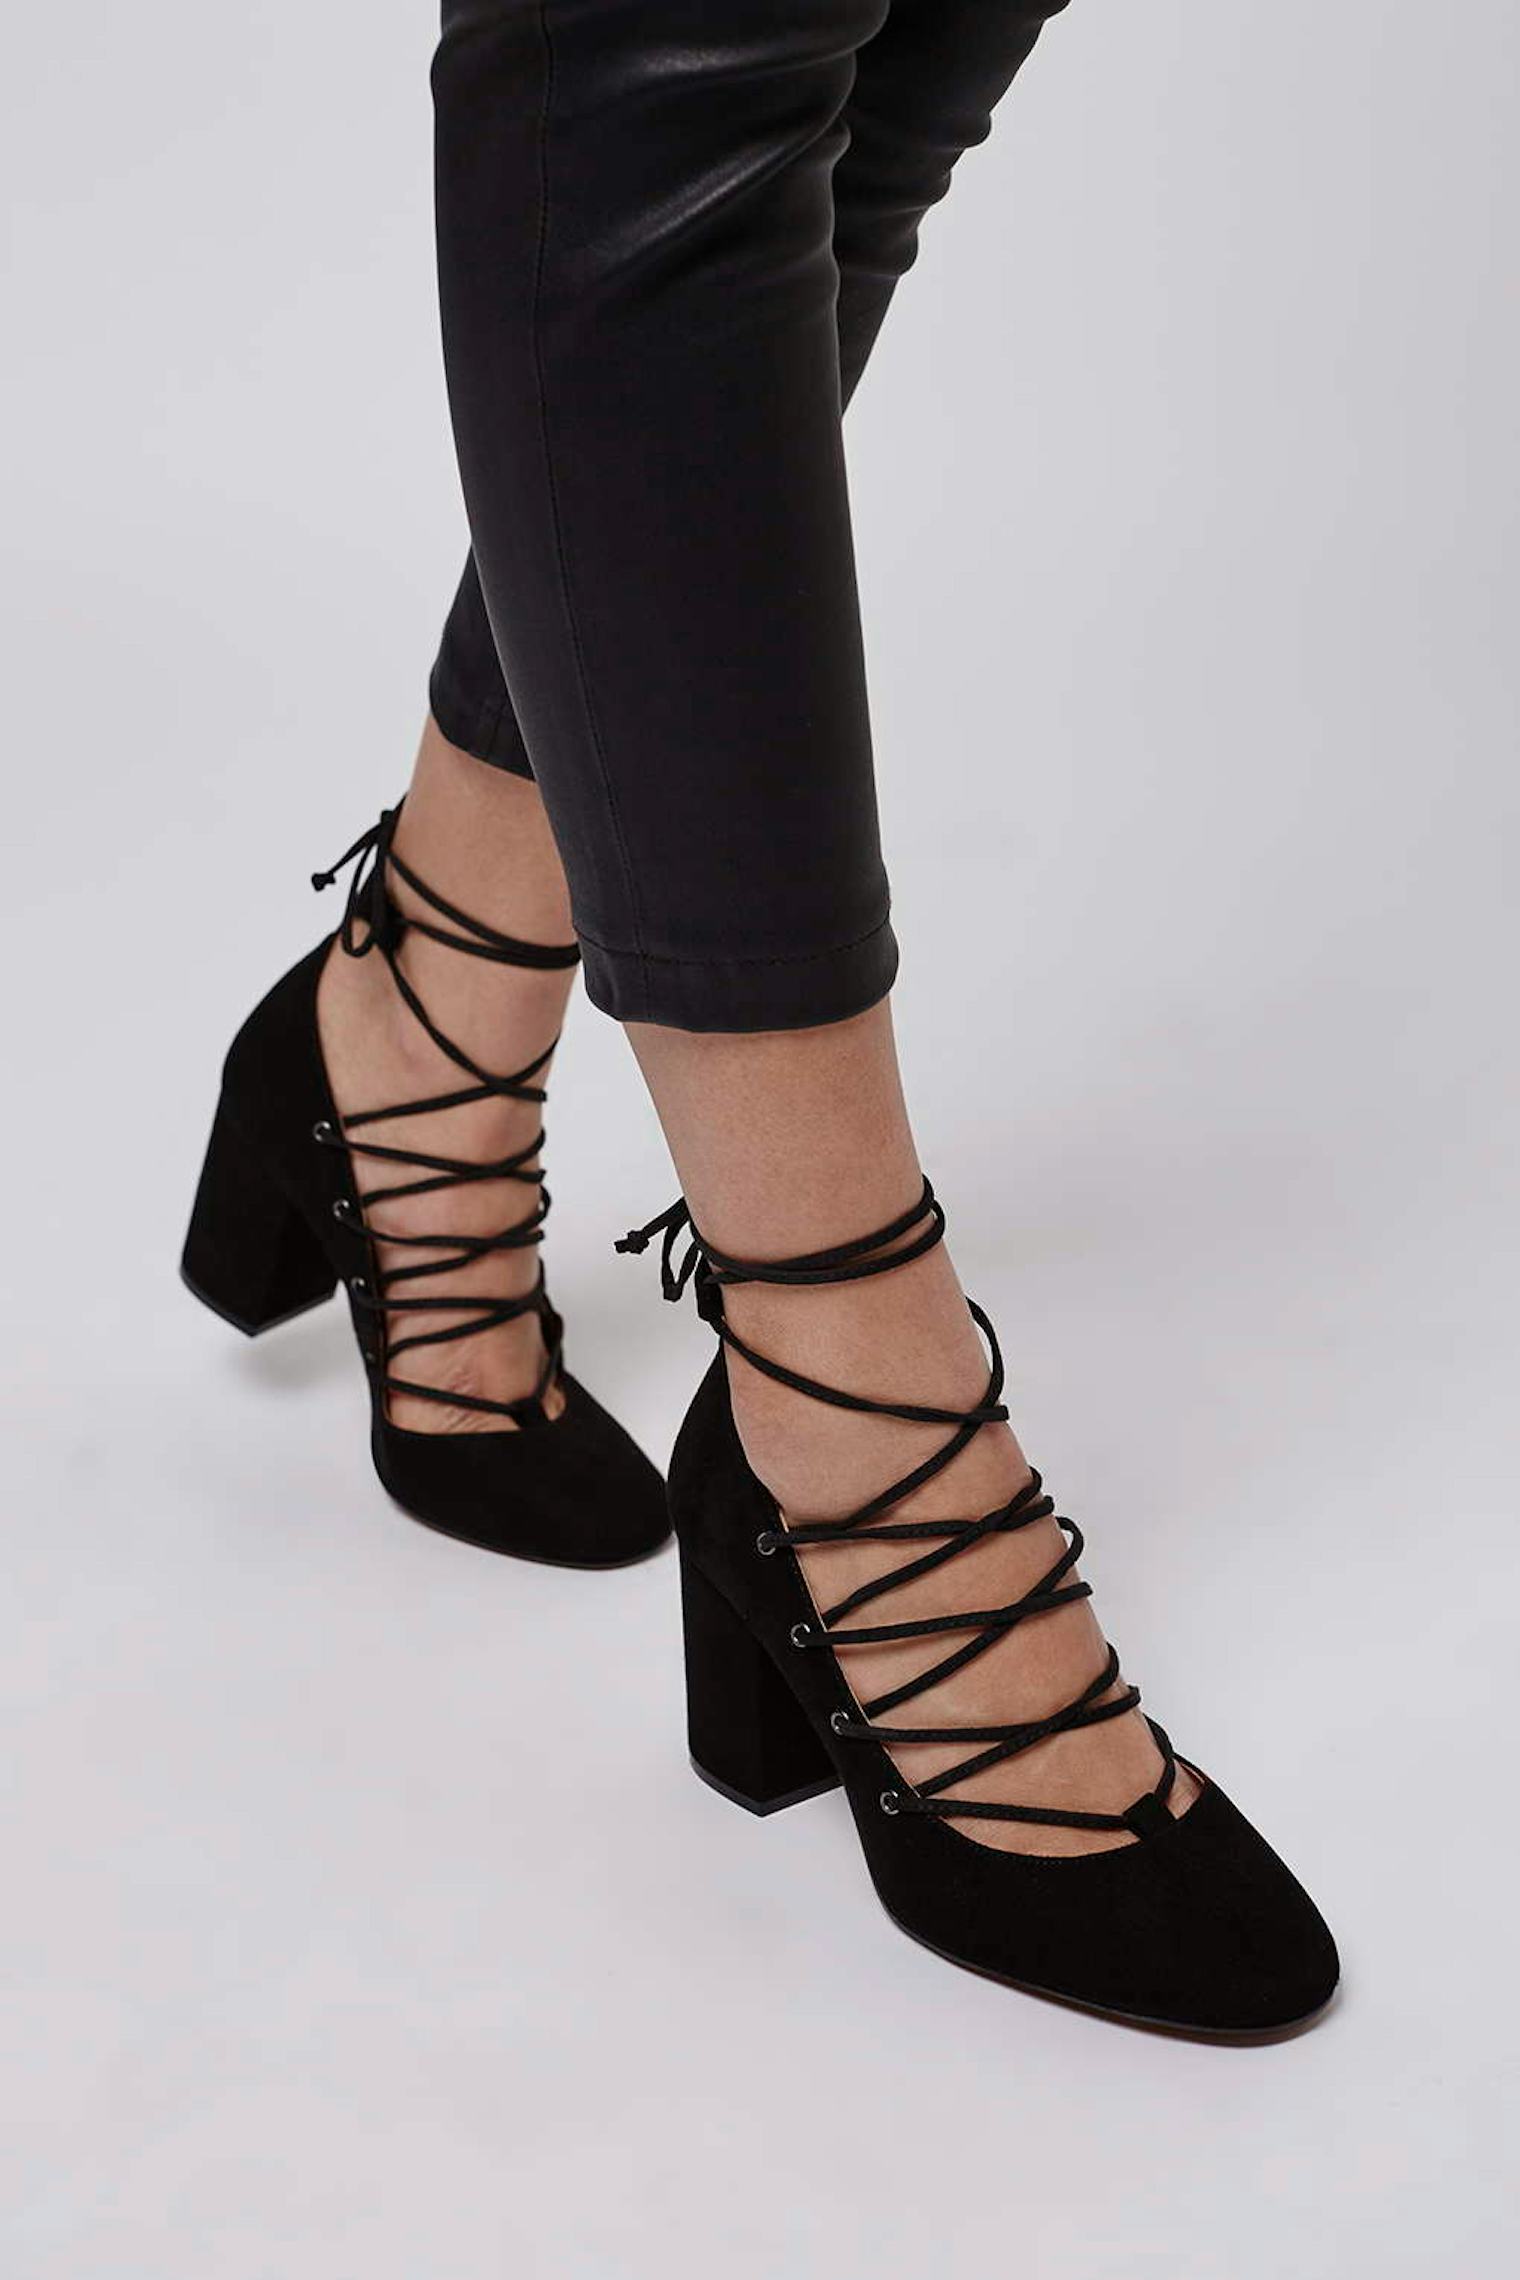 8 Kitten Block Heels That Prove You Should Take Style Notes From ...